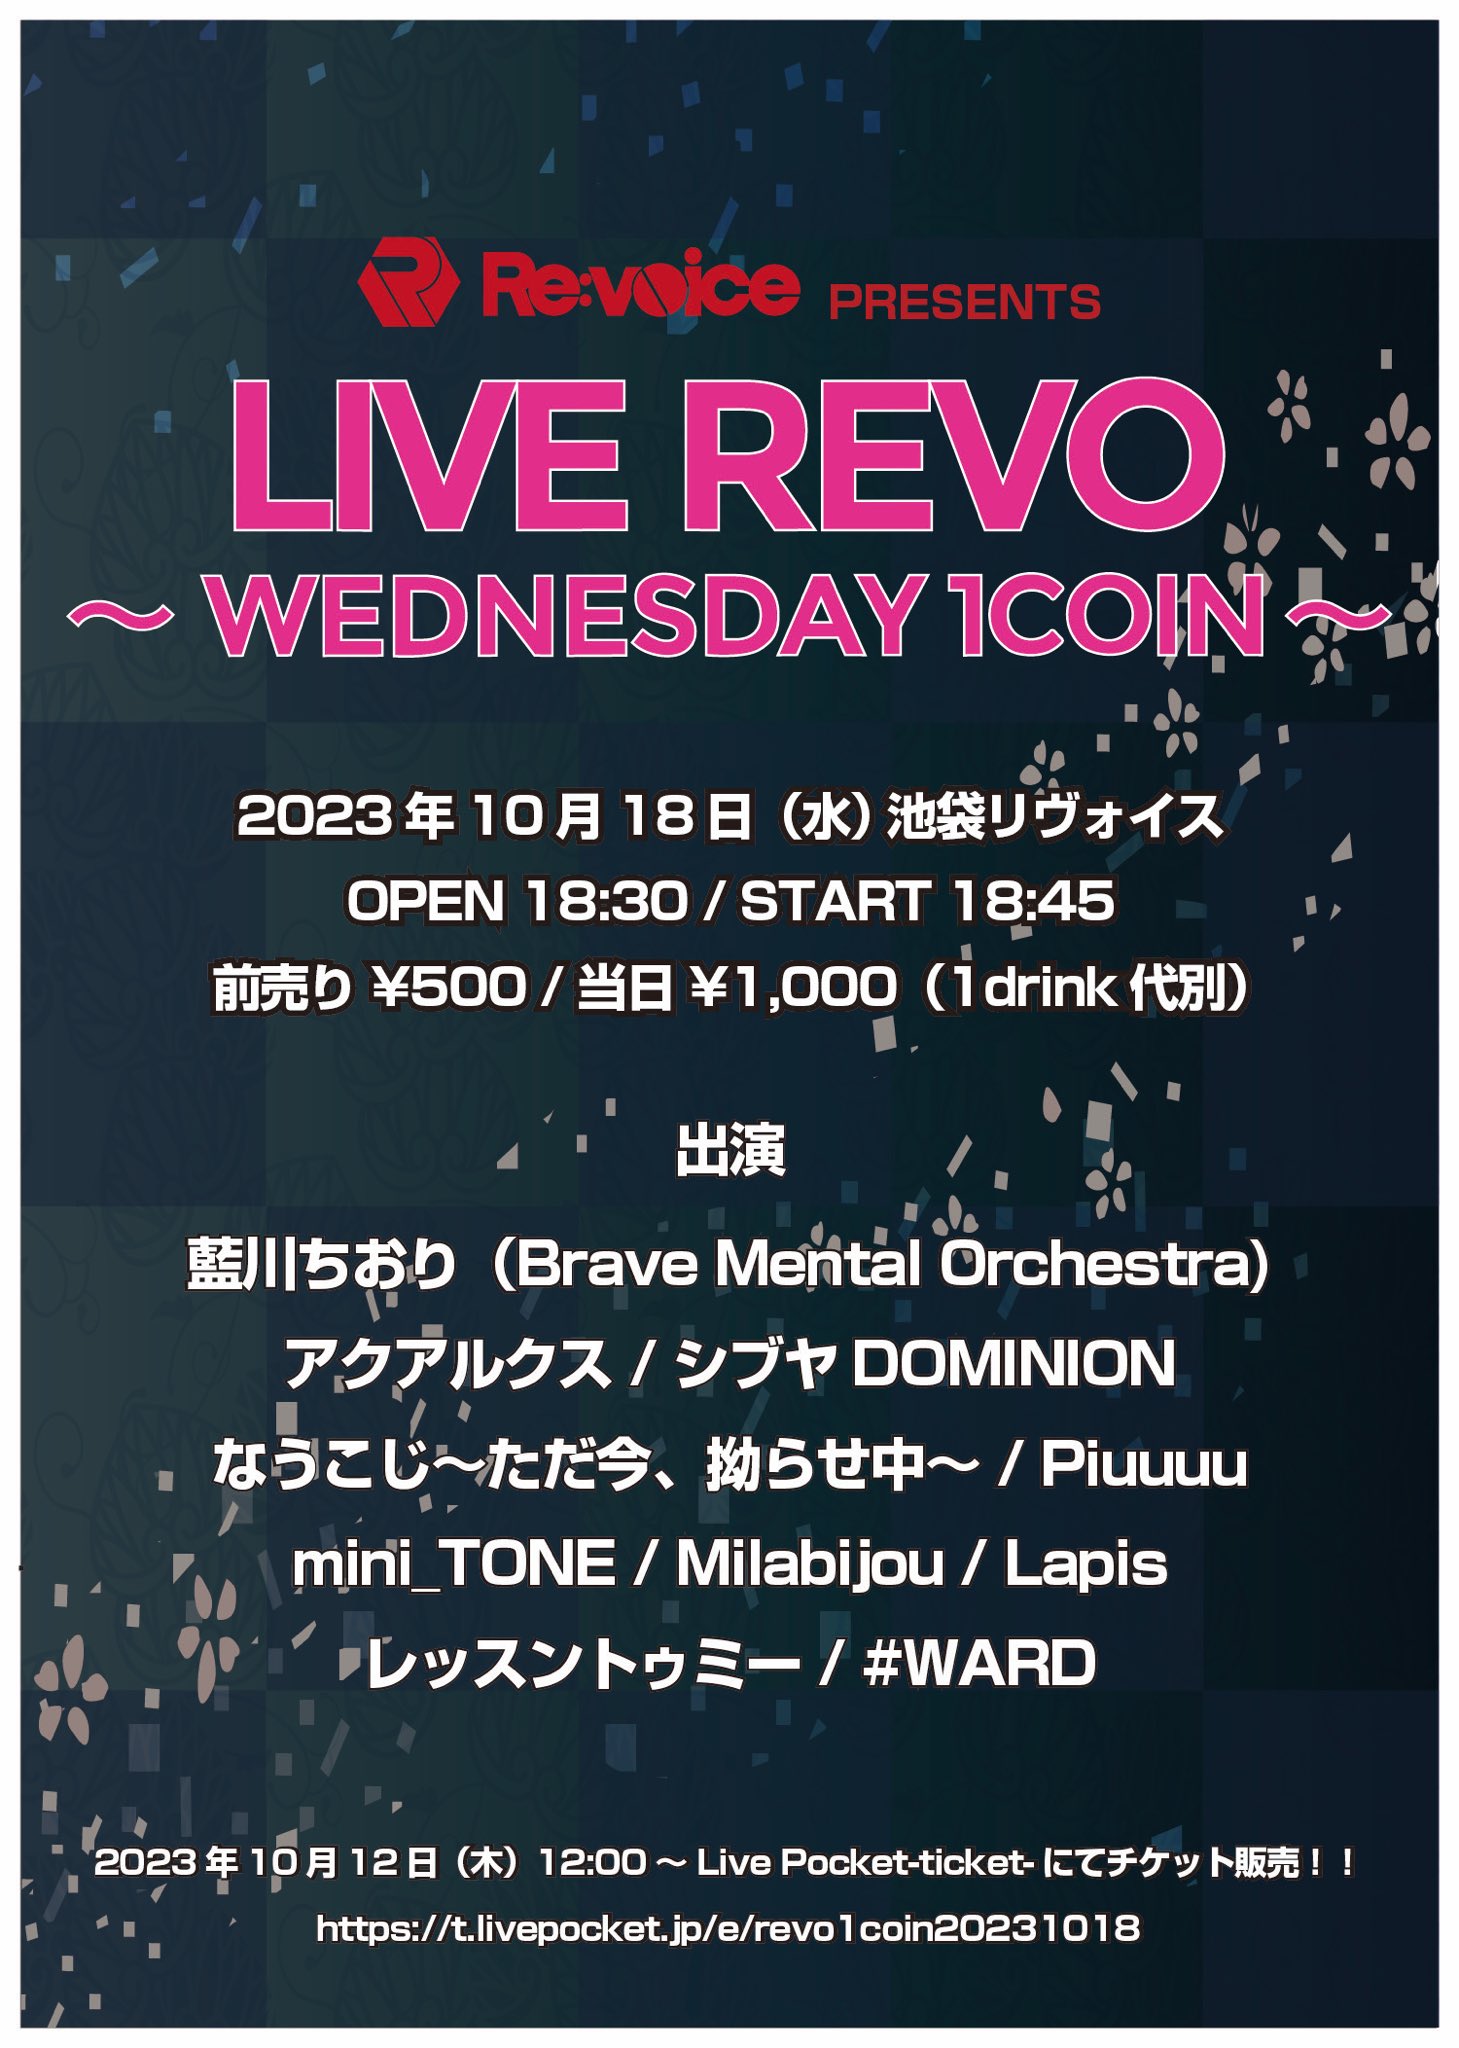 LIVE REVO ～WEDESDAY 1COIN～